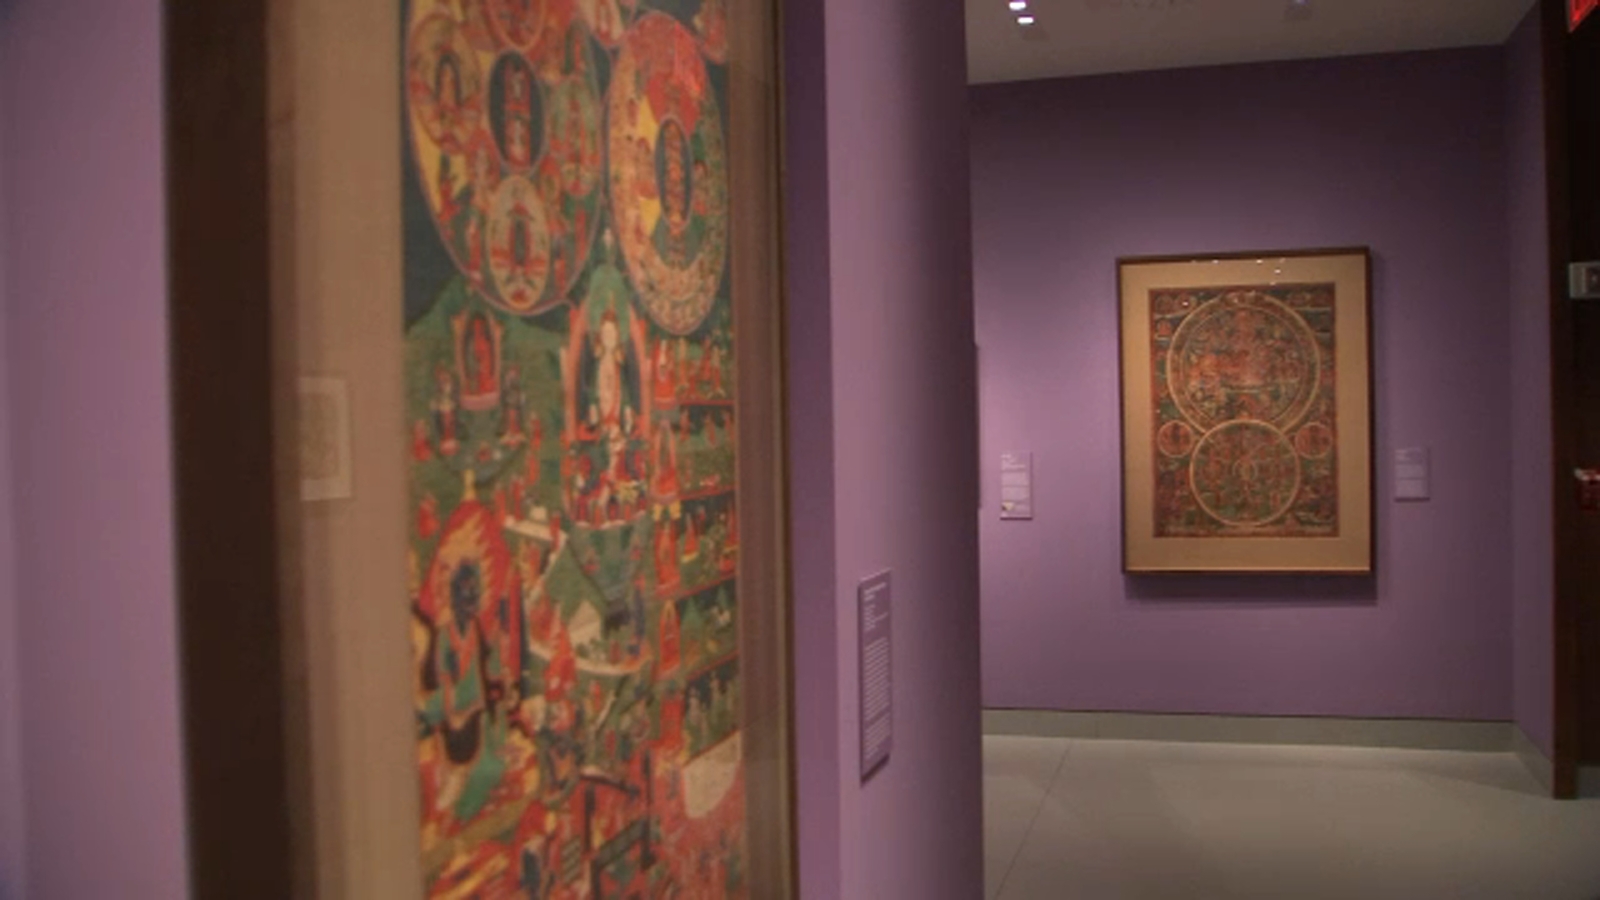 What's a dark retreat? NYC's Rubin Museum of Art workshop explores the sacred tradition